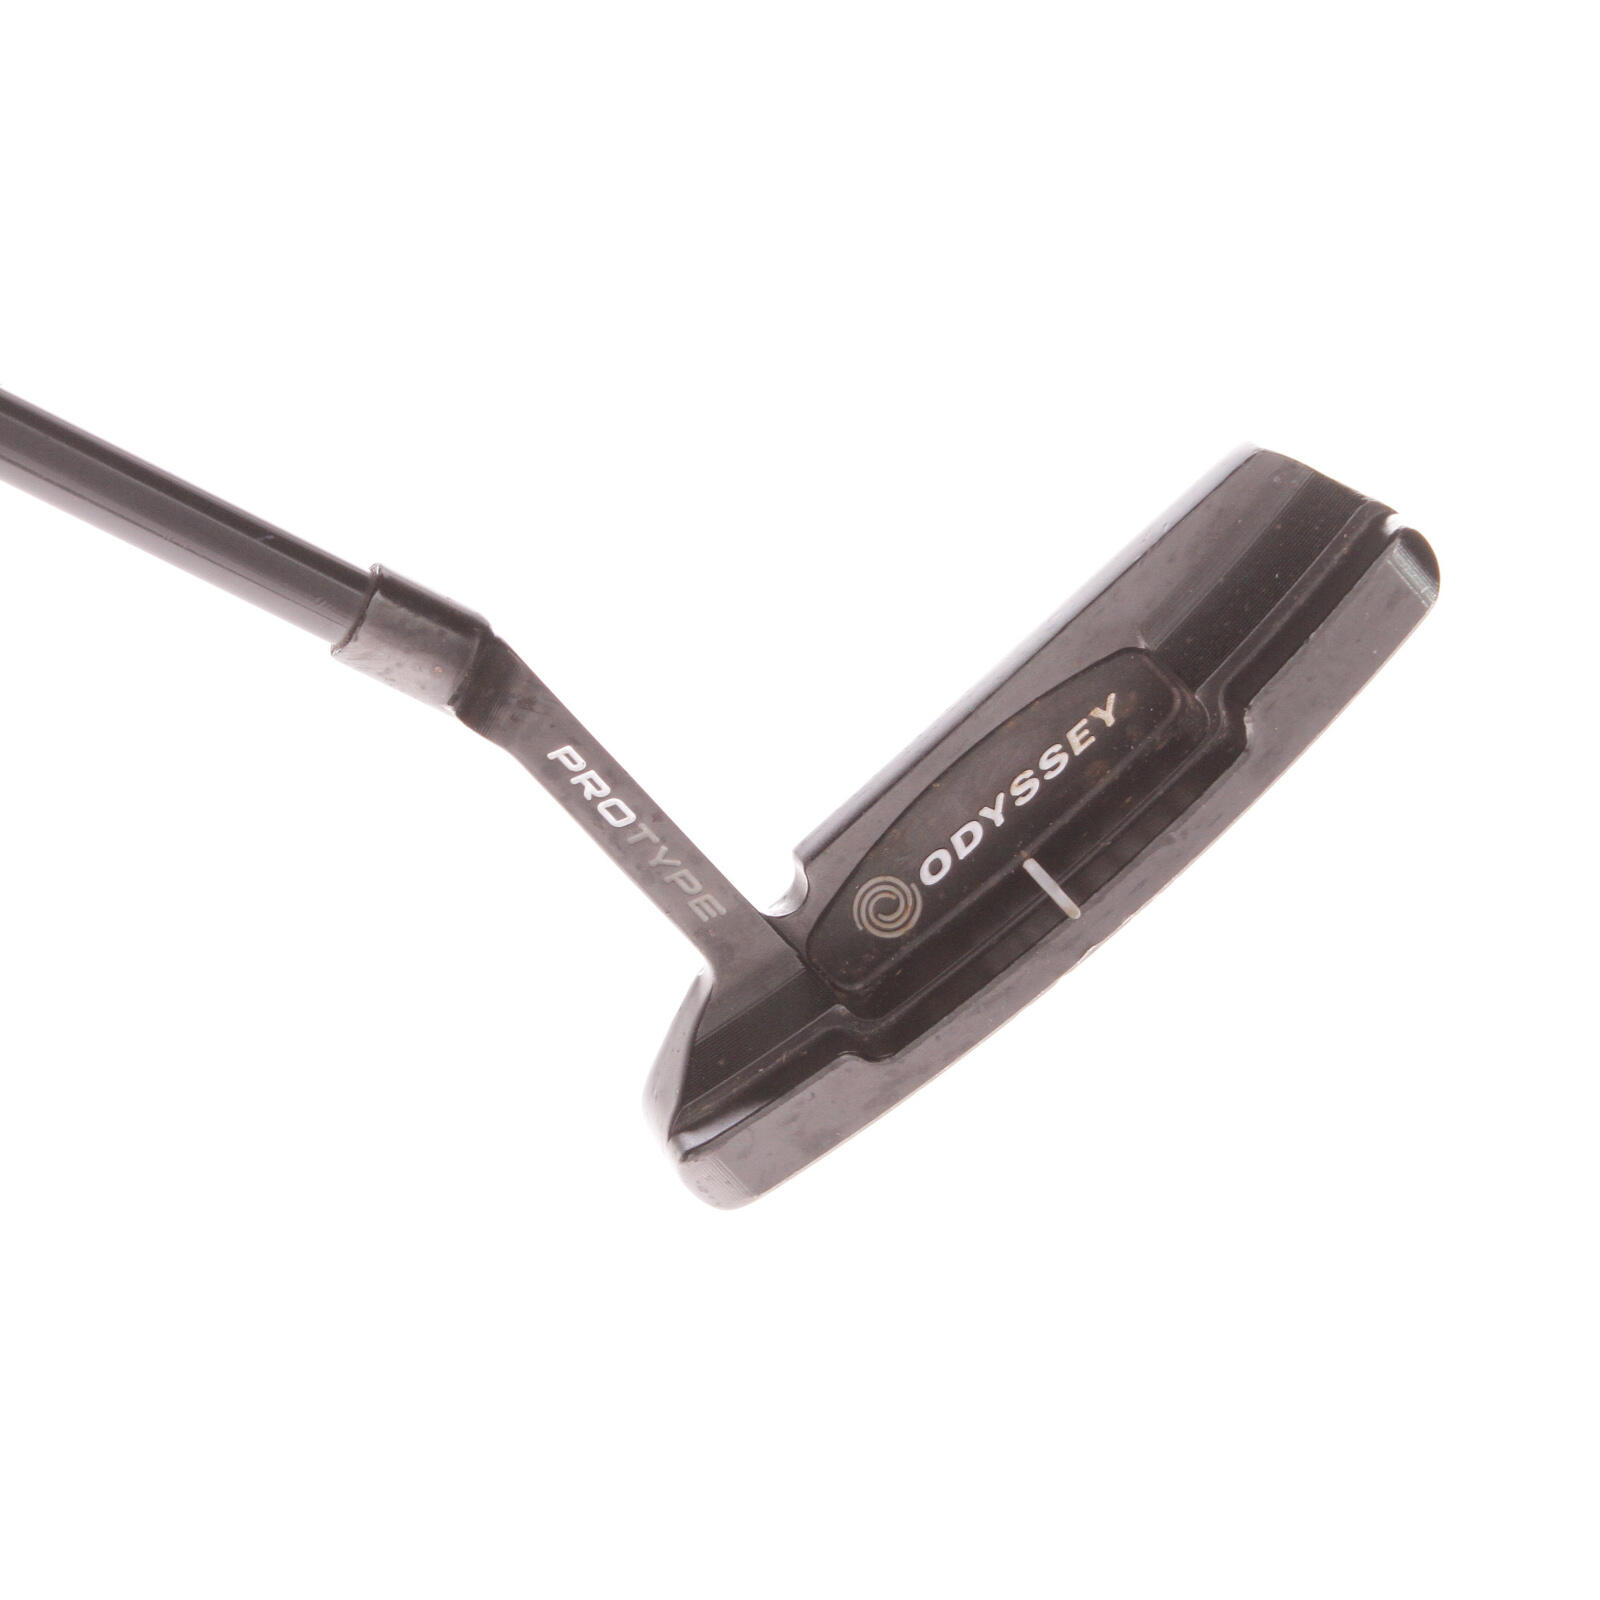 USED - Odyssey Pro Type 2 Putter 33 Inches Length Steel Right Handed - GRADE B 5/7